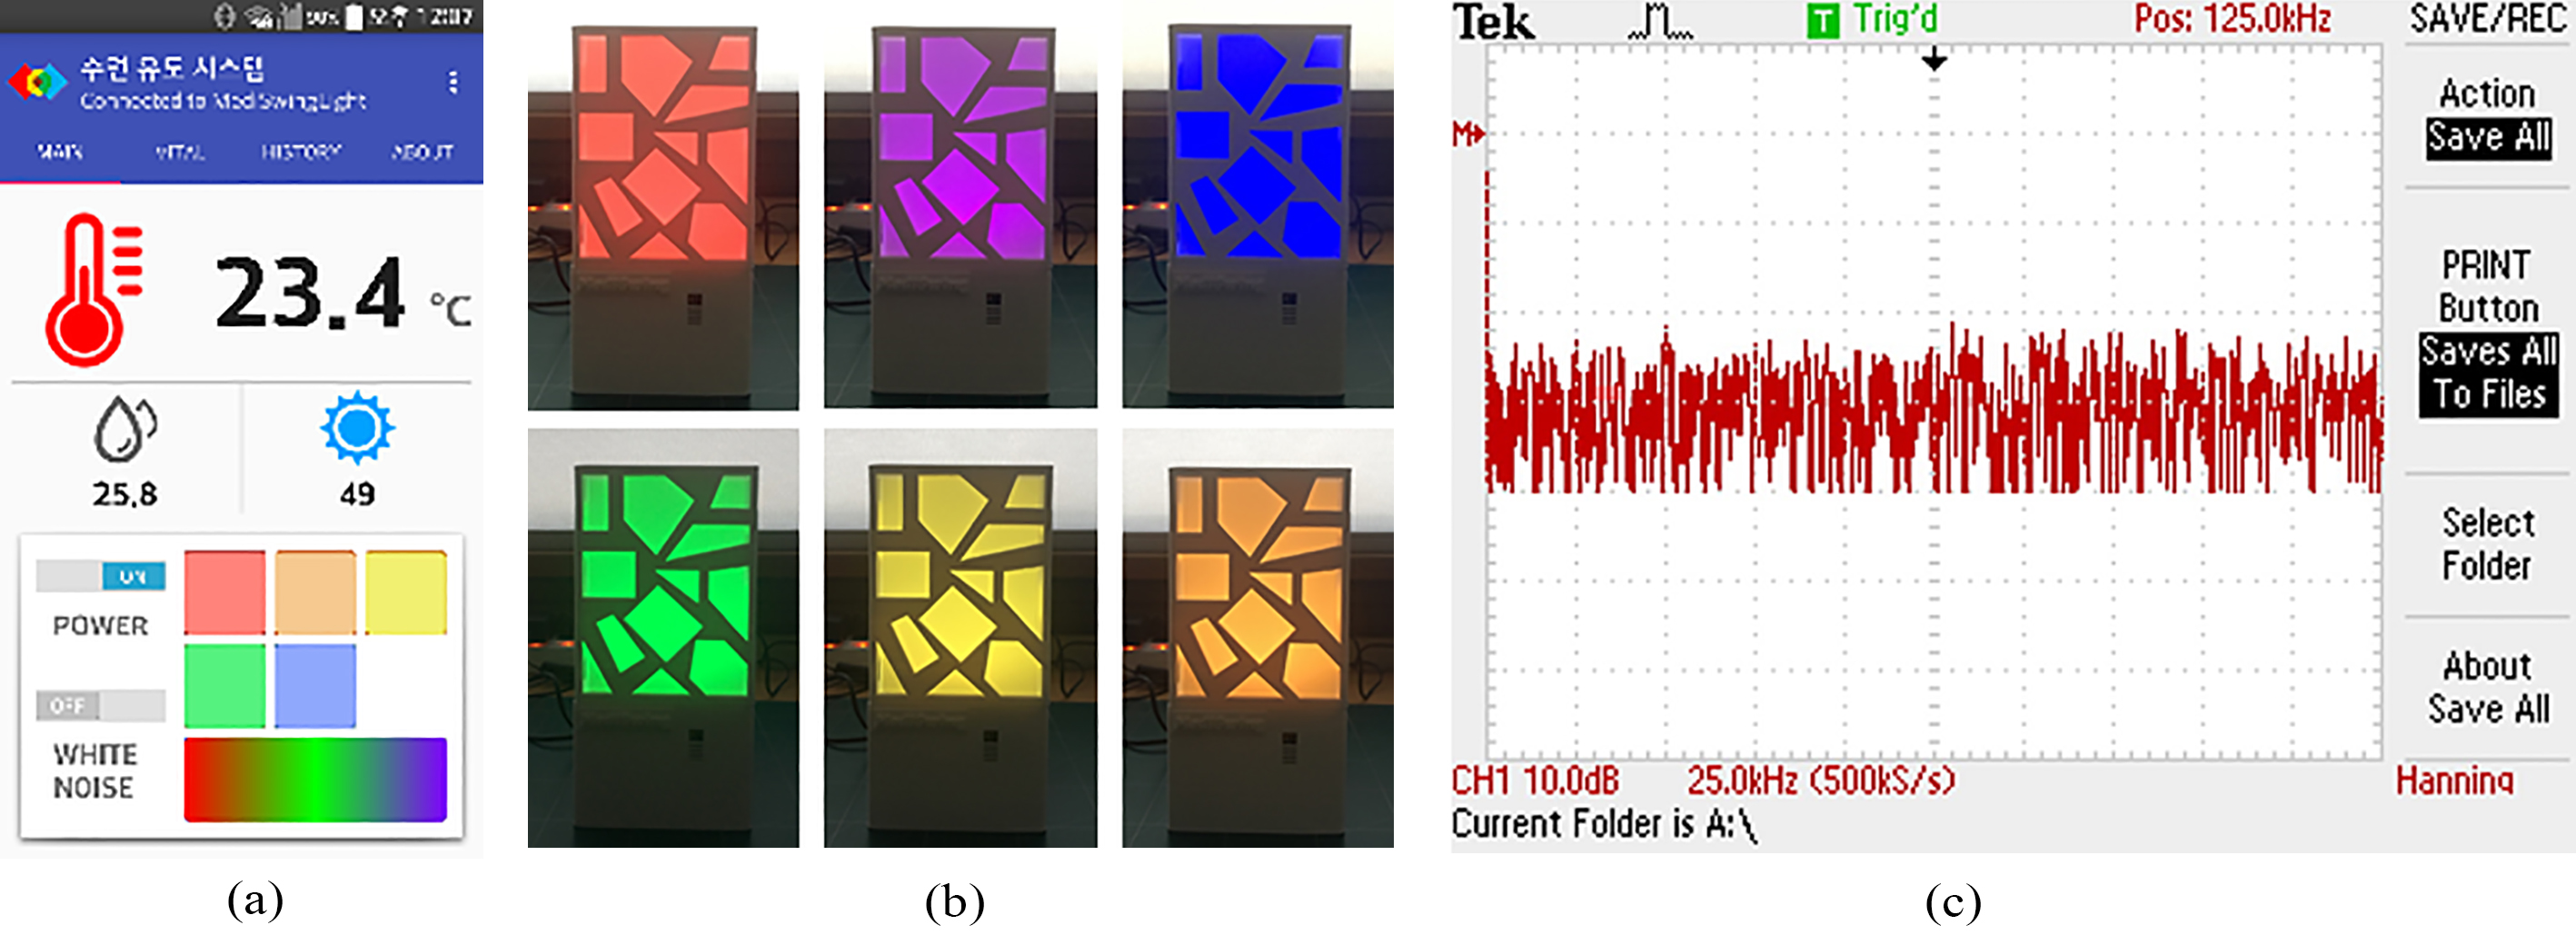 Use of the smartphone application to control the manufactured lighting device, (a) developed smartphone application based on the Android operating system, (b) Using the smartphone application to control the manufactured sleep-lighting device. (c) White noise output of the lighting device in the frequency domain.